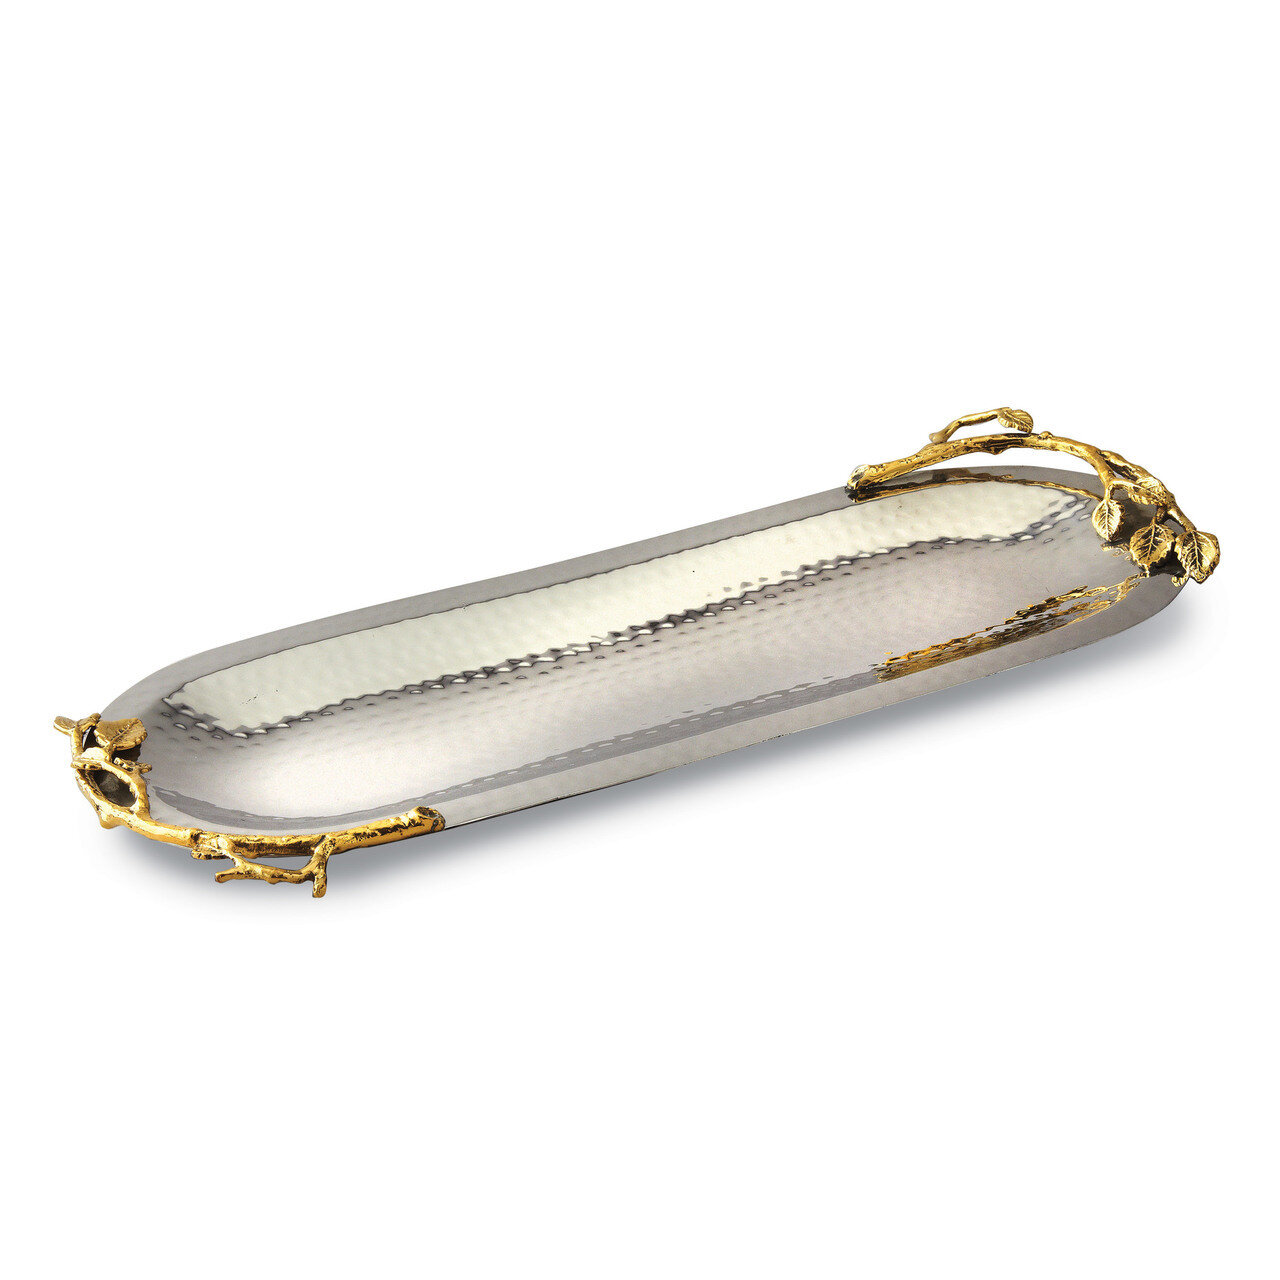 Golden Vine Hammered Narrow Oval Tray Stainless Steel GM14128